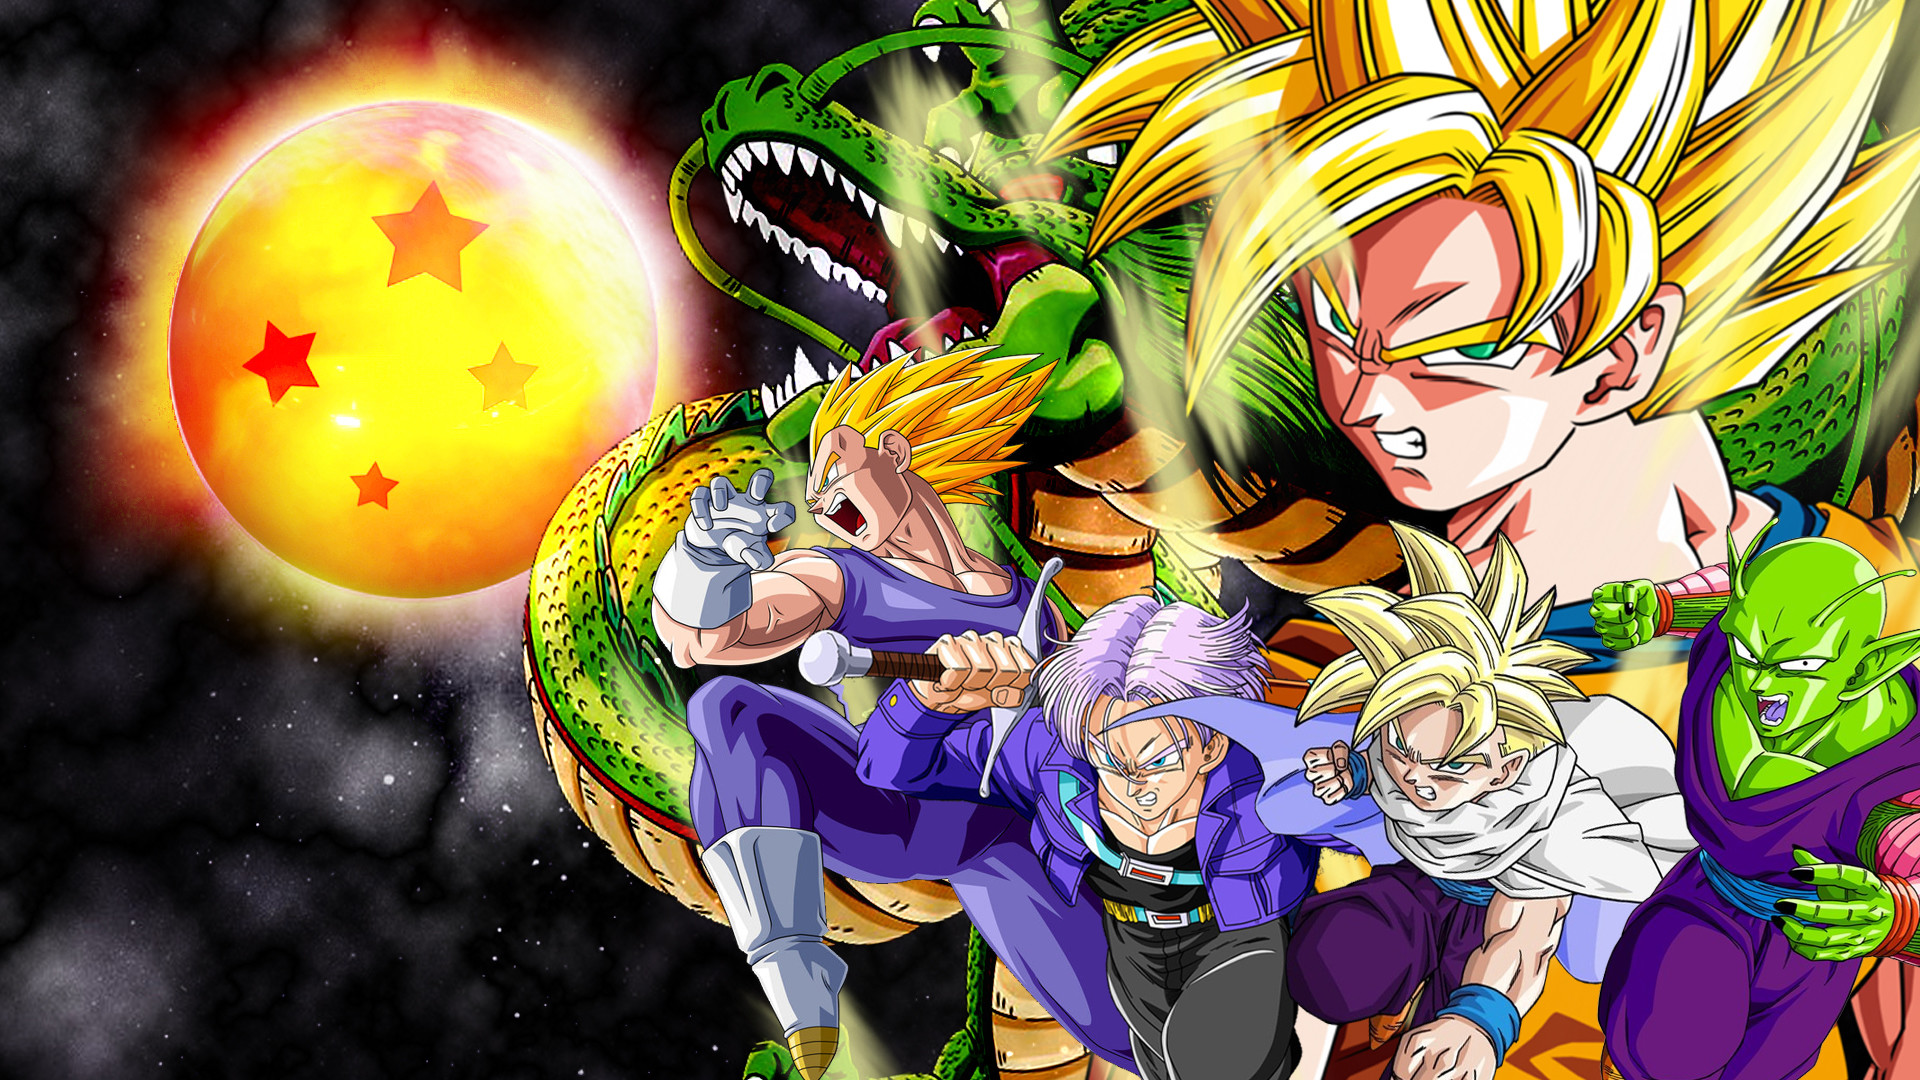 1920x1080 Dragon Ball wallpaper with Mix Character in High Resolution